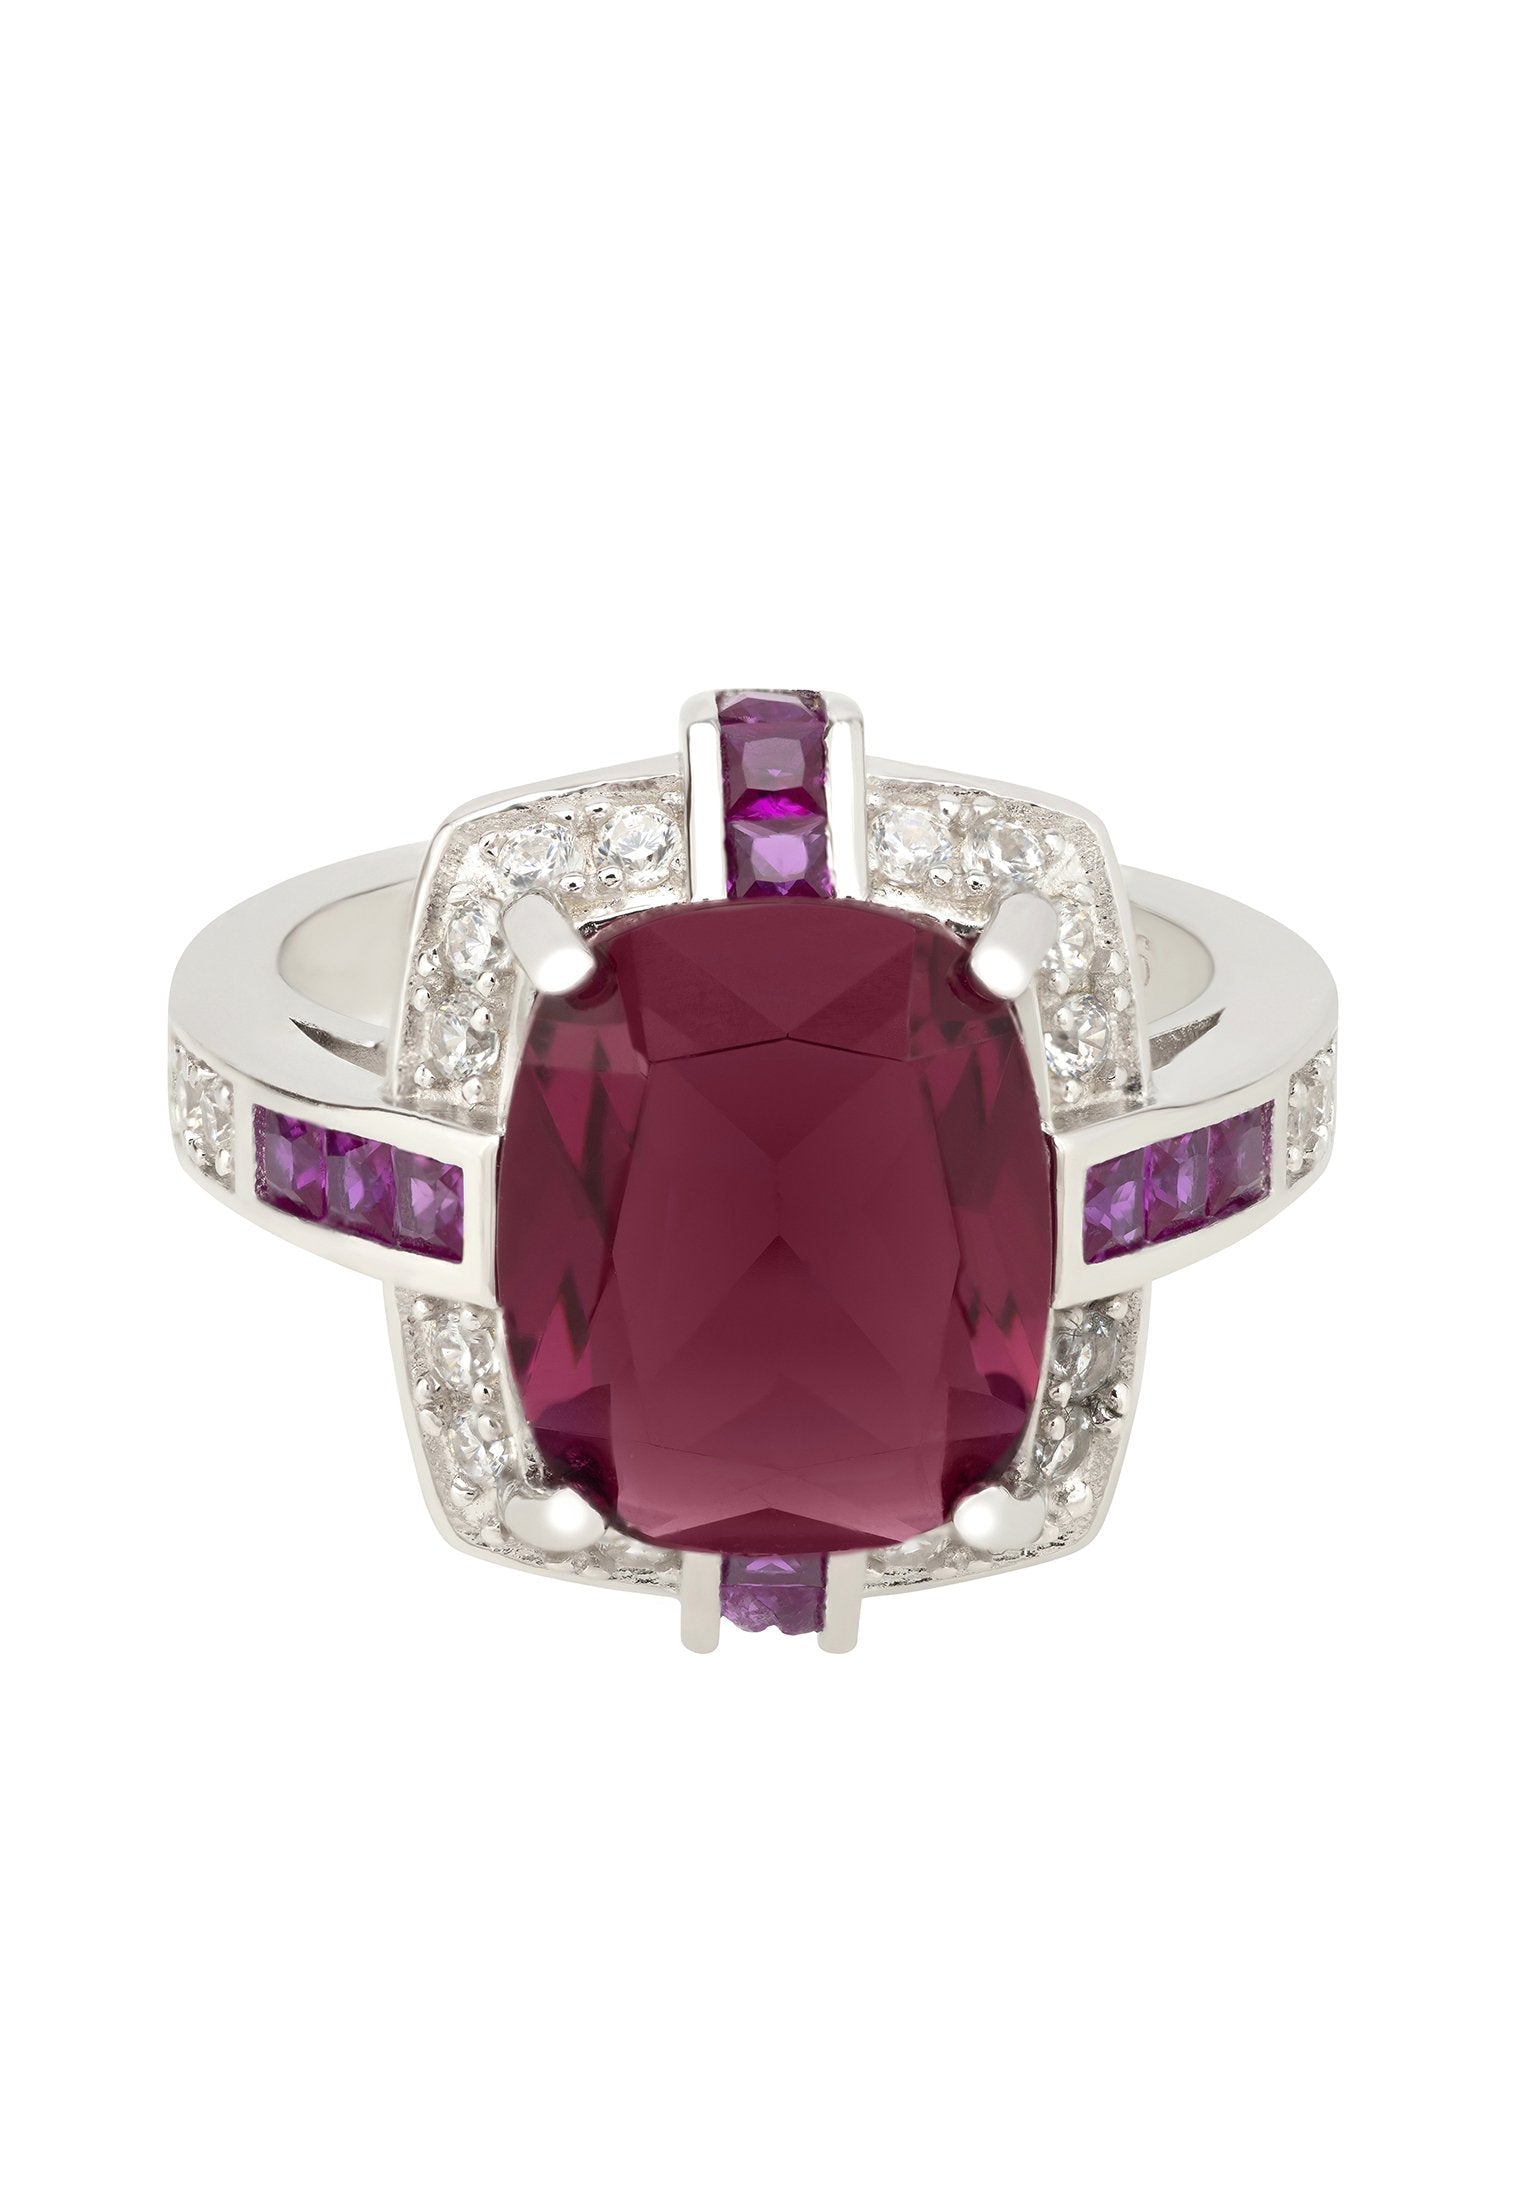 Bold Ruby Cocktail Ring with Zircons and Cushion Cut Rubies - Handcrafted in Sterling Silver for Statement Jewelry Lovers Bijou Her